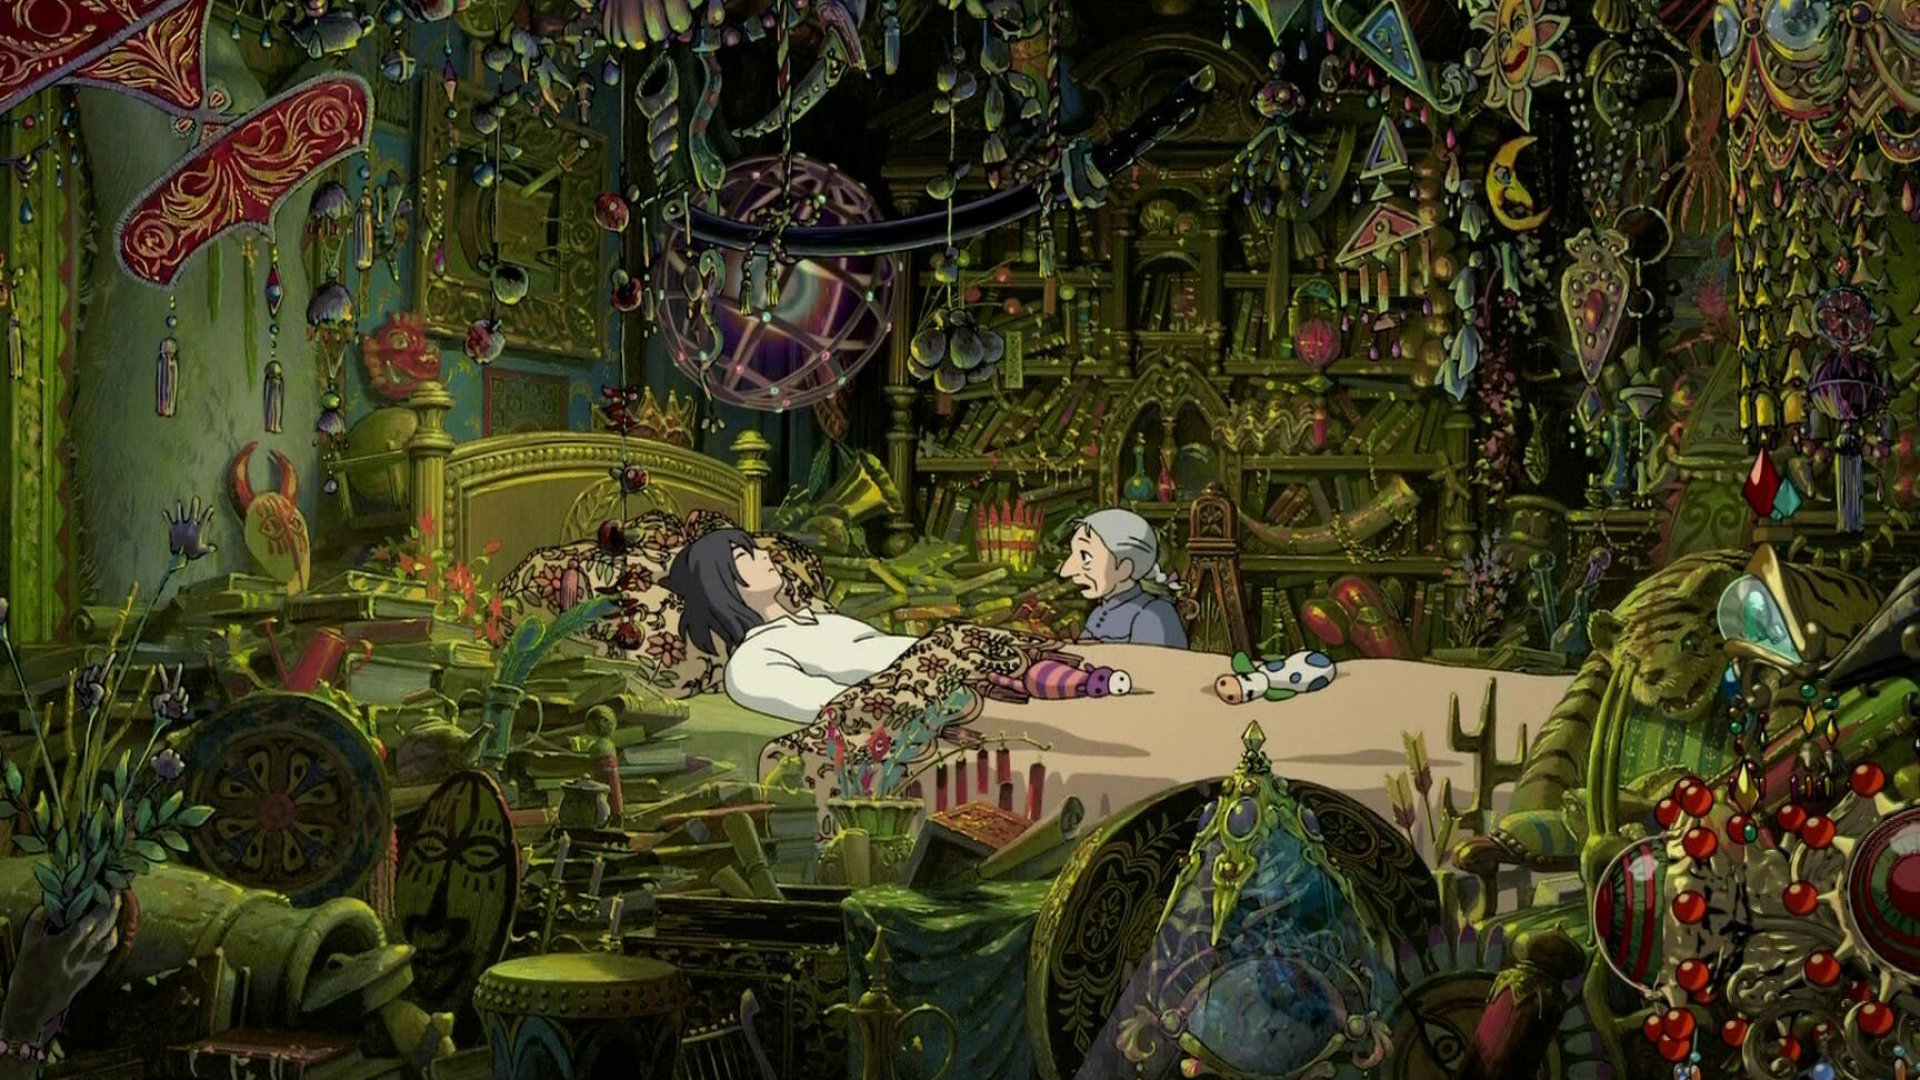 Studio Ghibli: The film follows Sophie, a young milliner who is turned into an elderly woman. 1920x1080 Full HD Background.